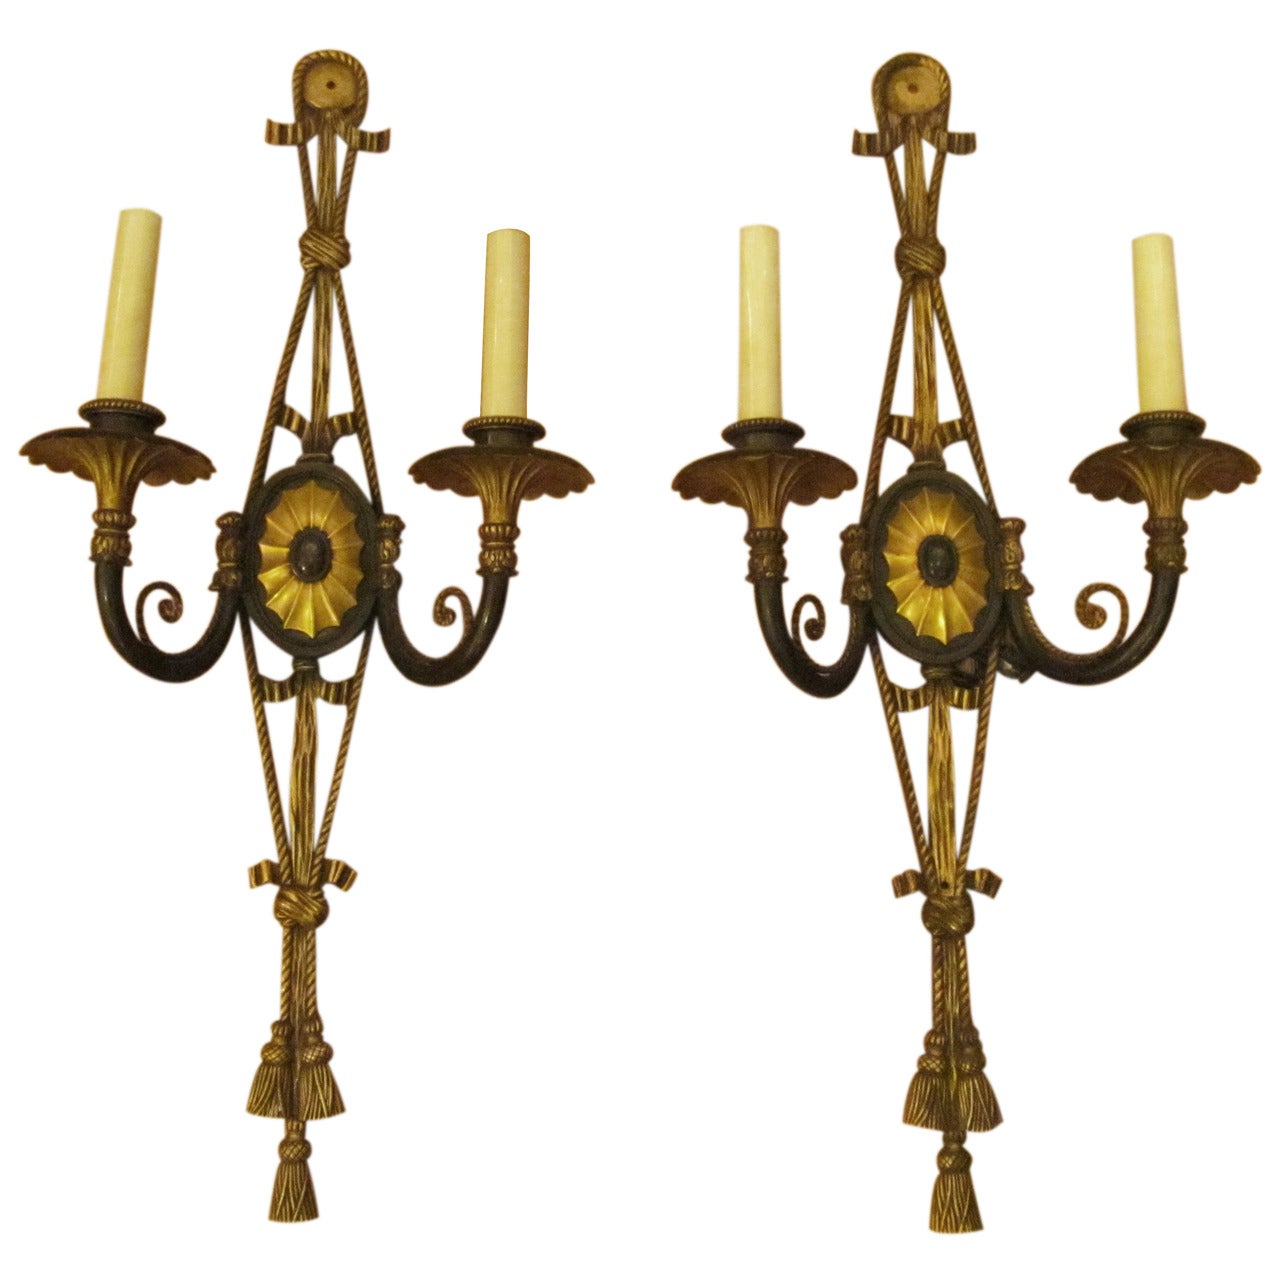 Pair of Caldwell Bronze Sconces with Triple Tassels and Center Spider Web, 1920s